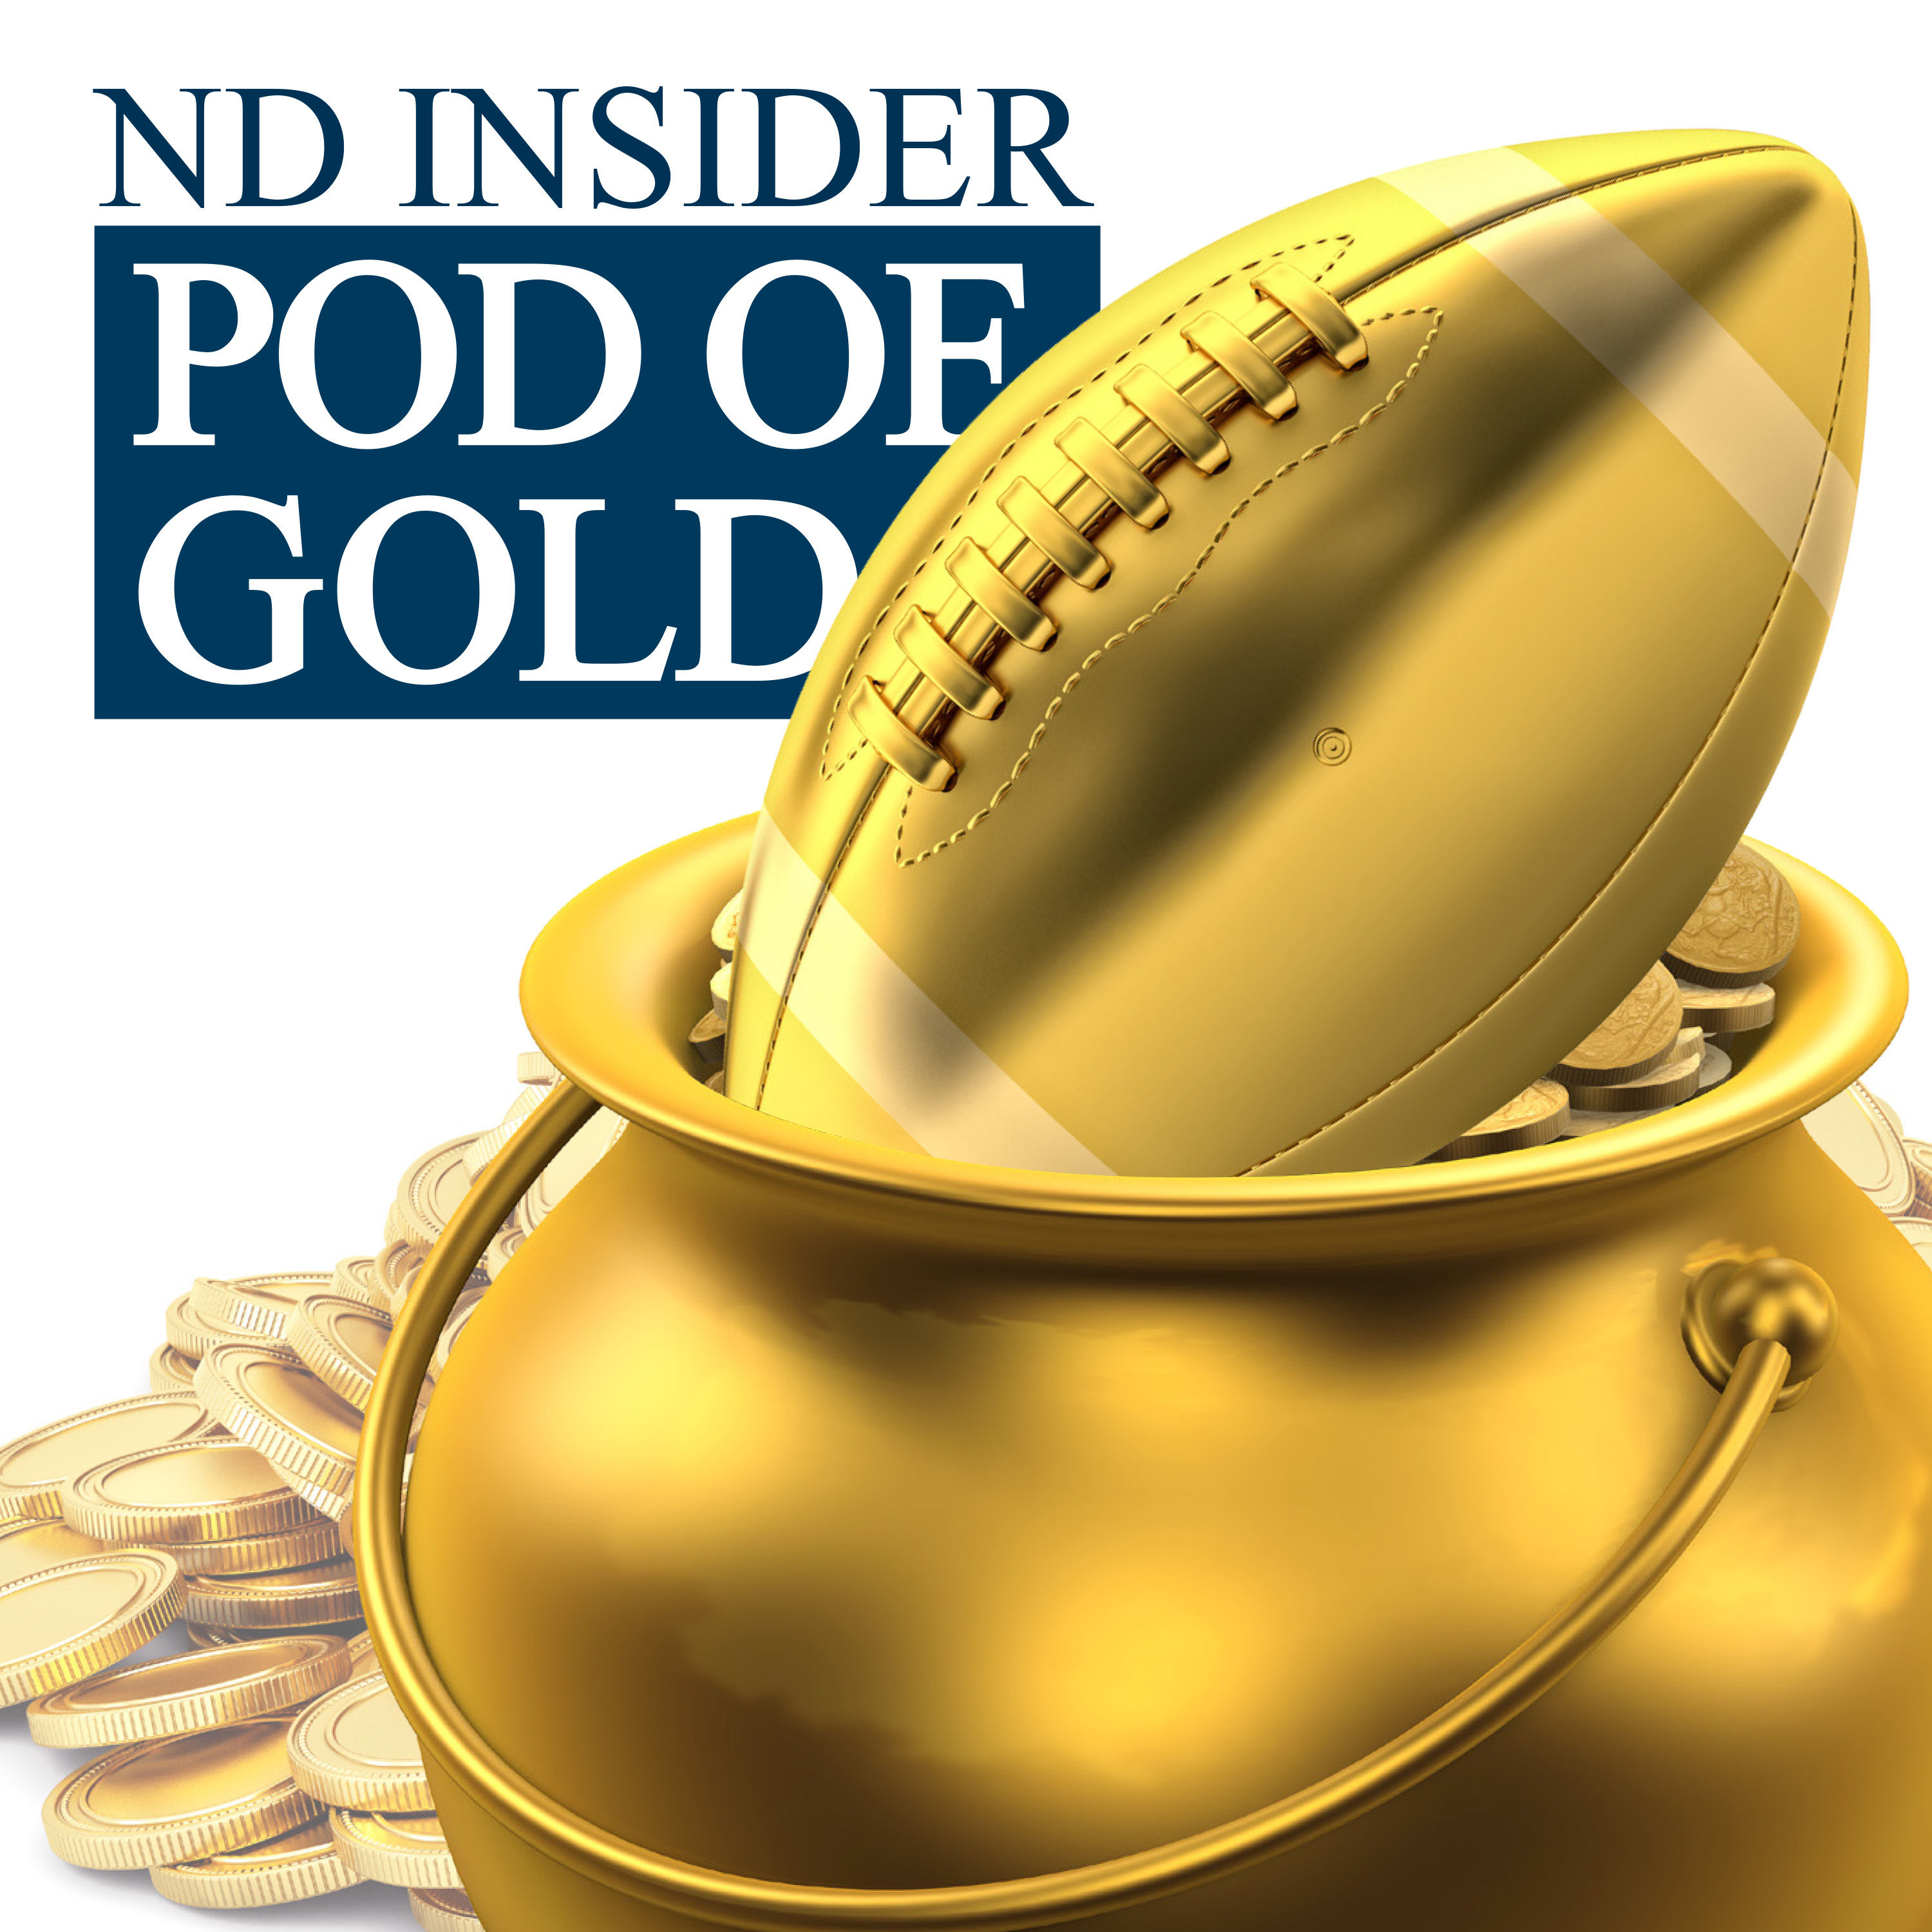 Dennis Dodd on Notre Dame-North Carolina and the College Football Playoff